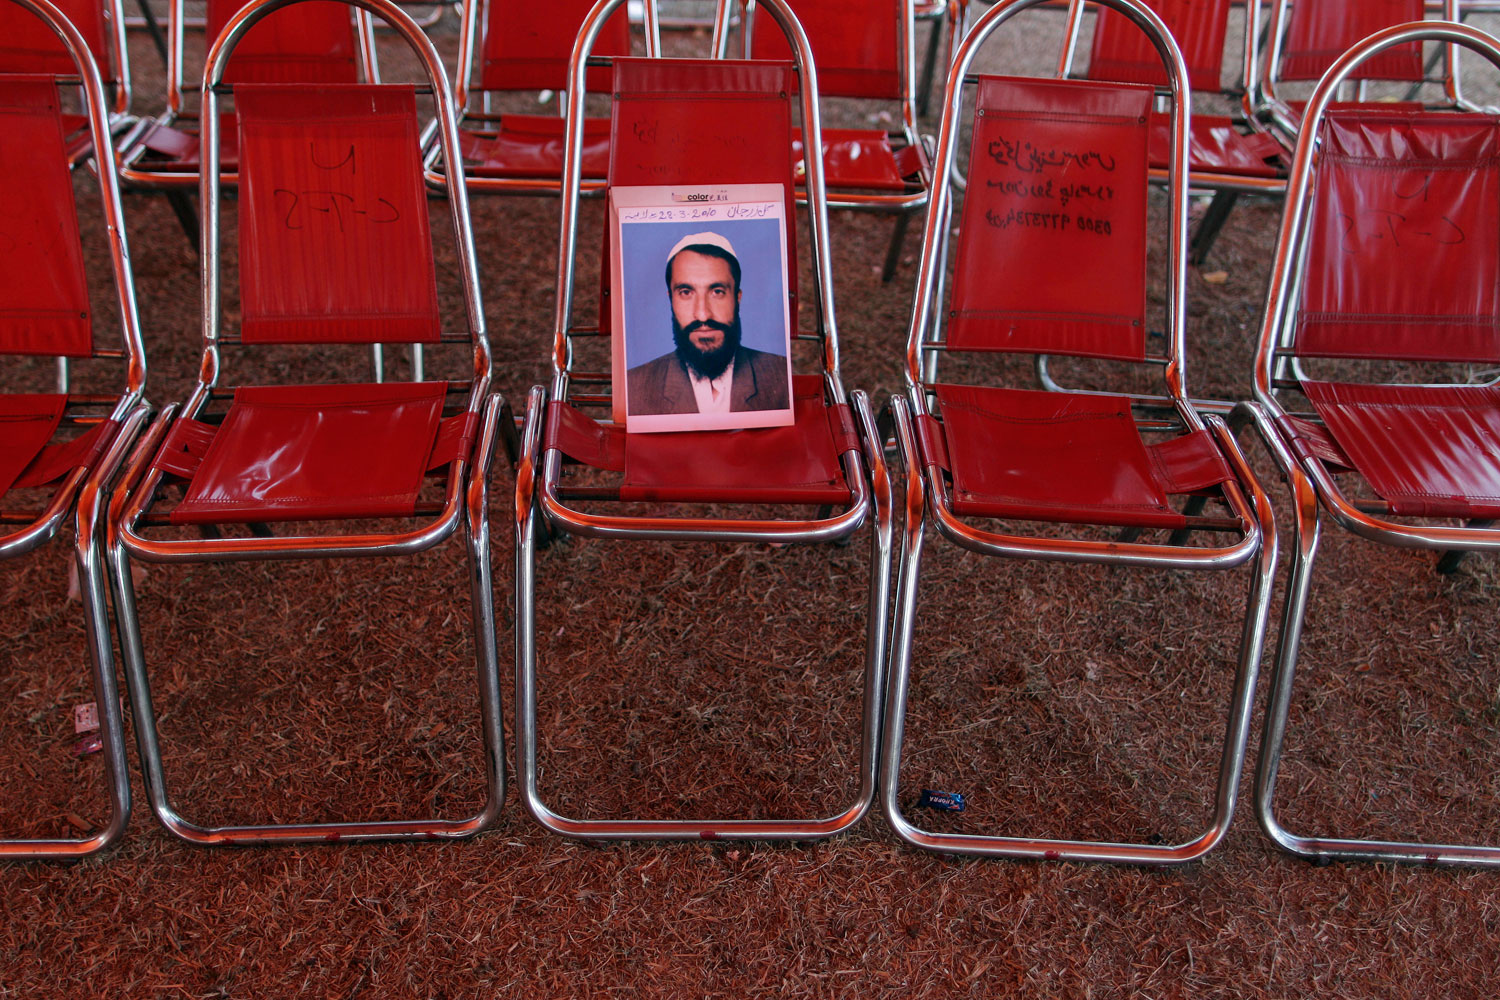 Feb. 24, 2012. A photograph of Pakistani Gulzar Jaan Ghullzir Jan, 35, who went missing in 2010, is left on a chair inside a tent near the parliament in Islamabad, Pakistan. The Supreme Court has now given the families a measure of hope by bringing a landmark case against the Inter-Services Intelligence agency, the country's most feared spy network and suspected to be behind most of the abductions.